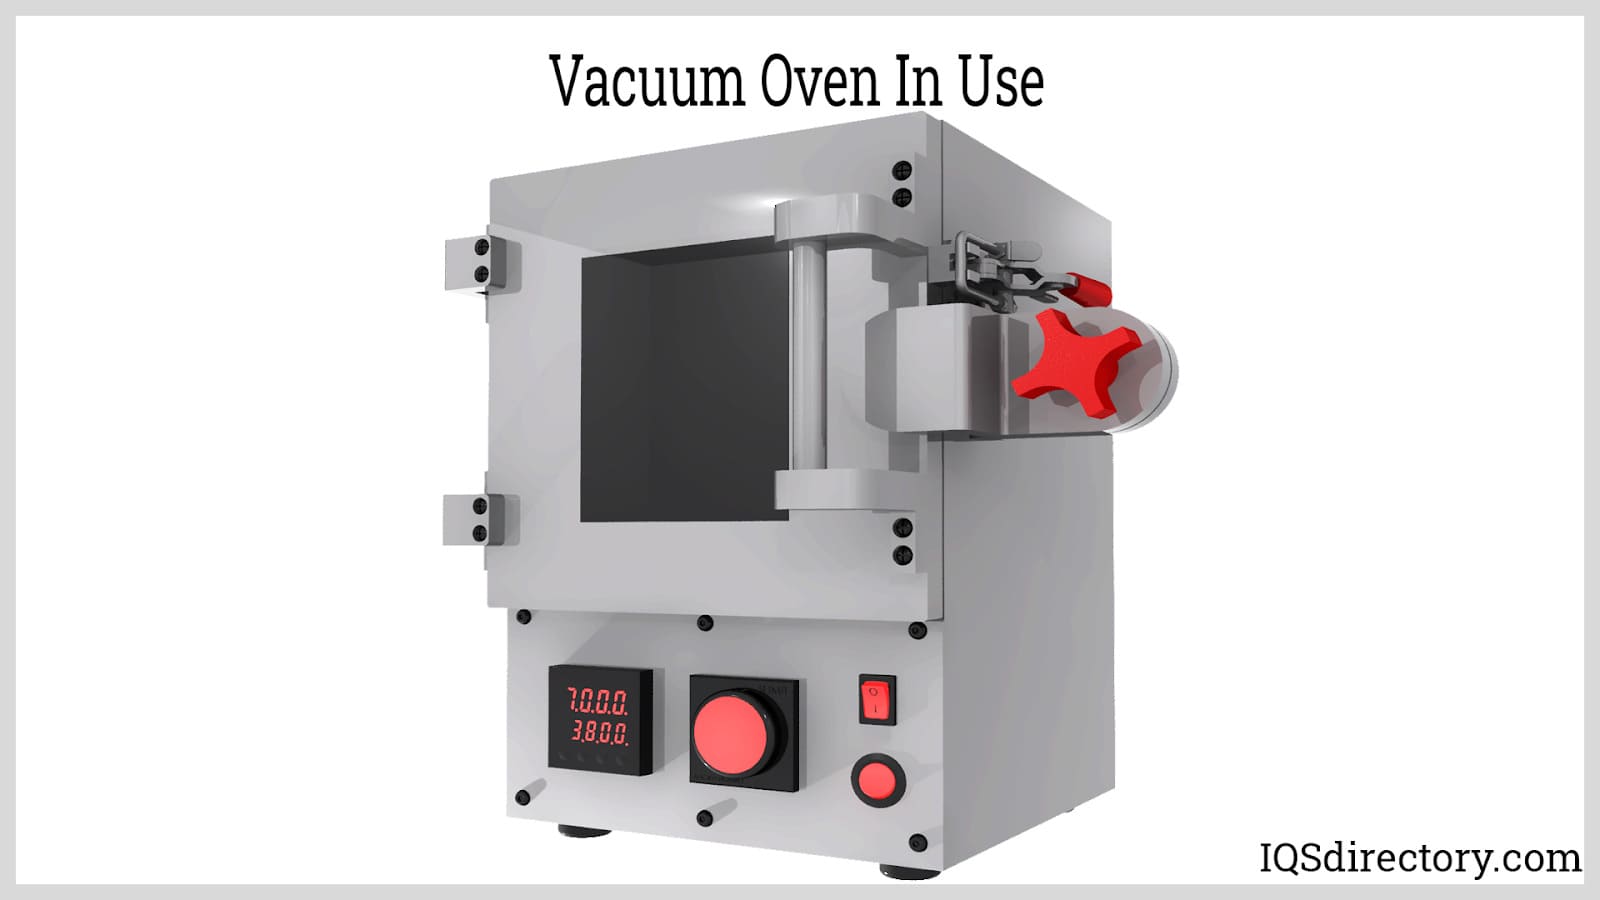 Vacuum Oven In Use